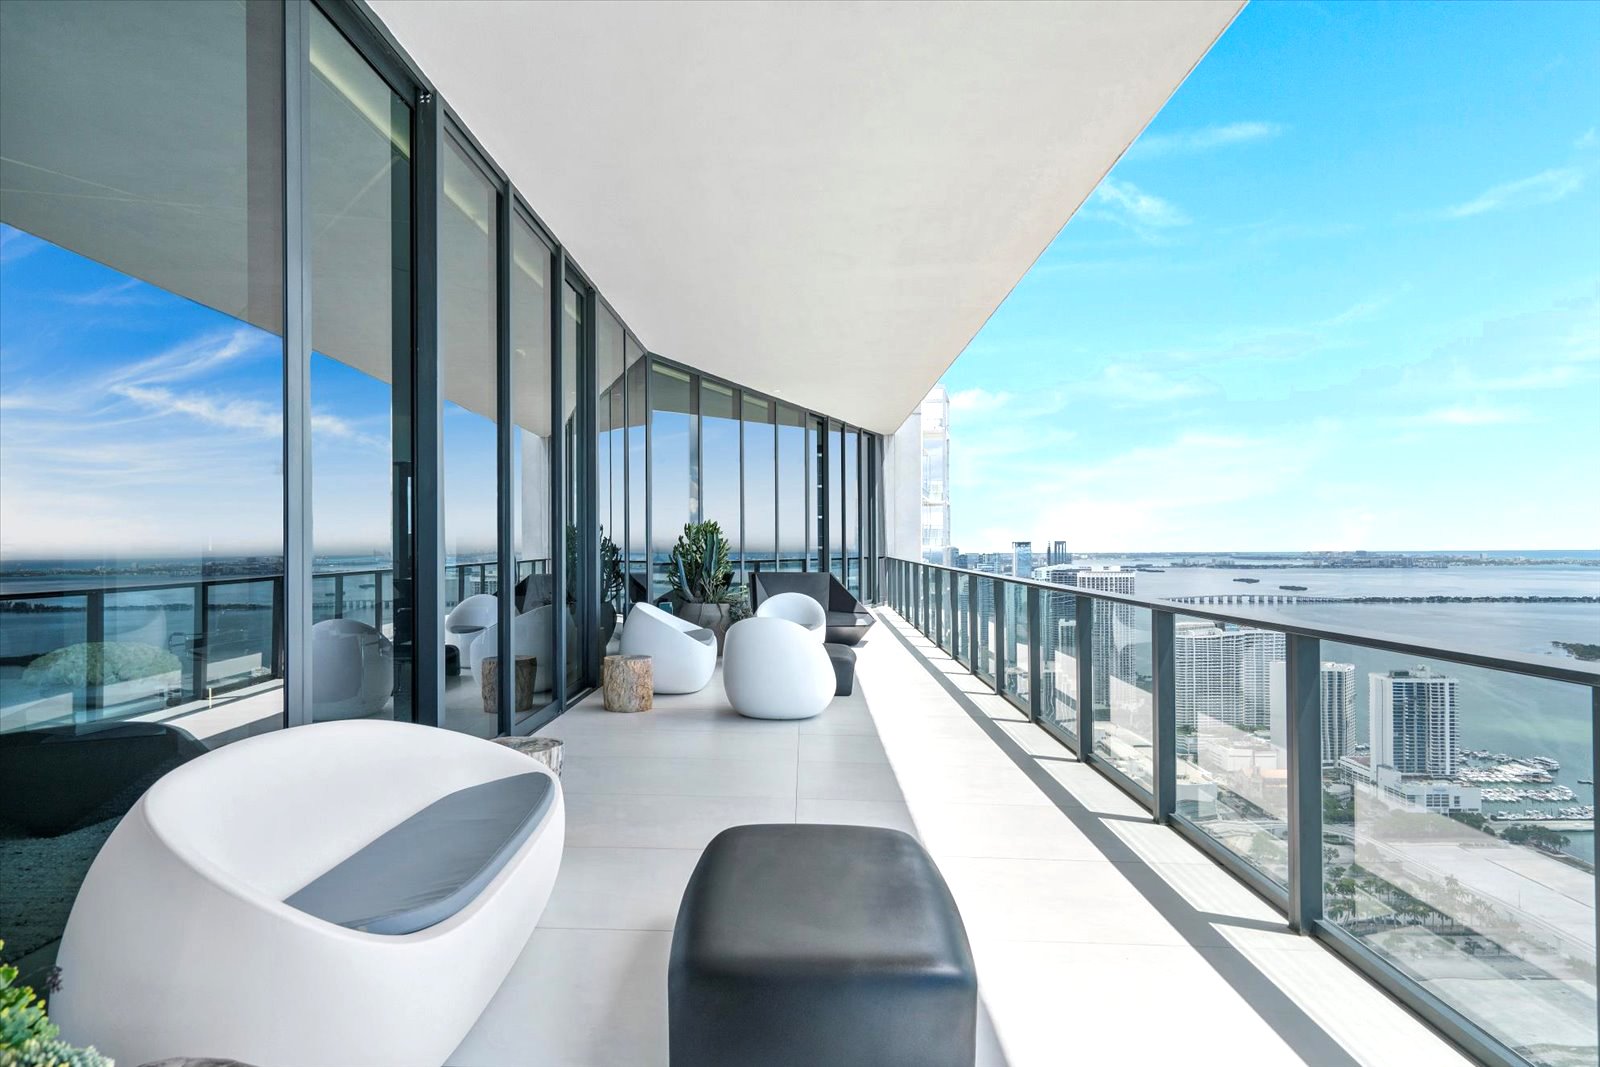 Step Inside A Full Floor Penthouse At The Zaha Hadid-Designed One Thousand Museum Asking $28 Million 33.jpg